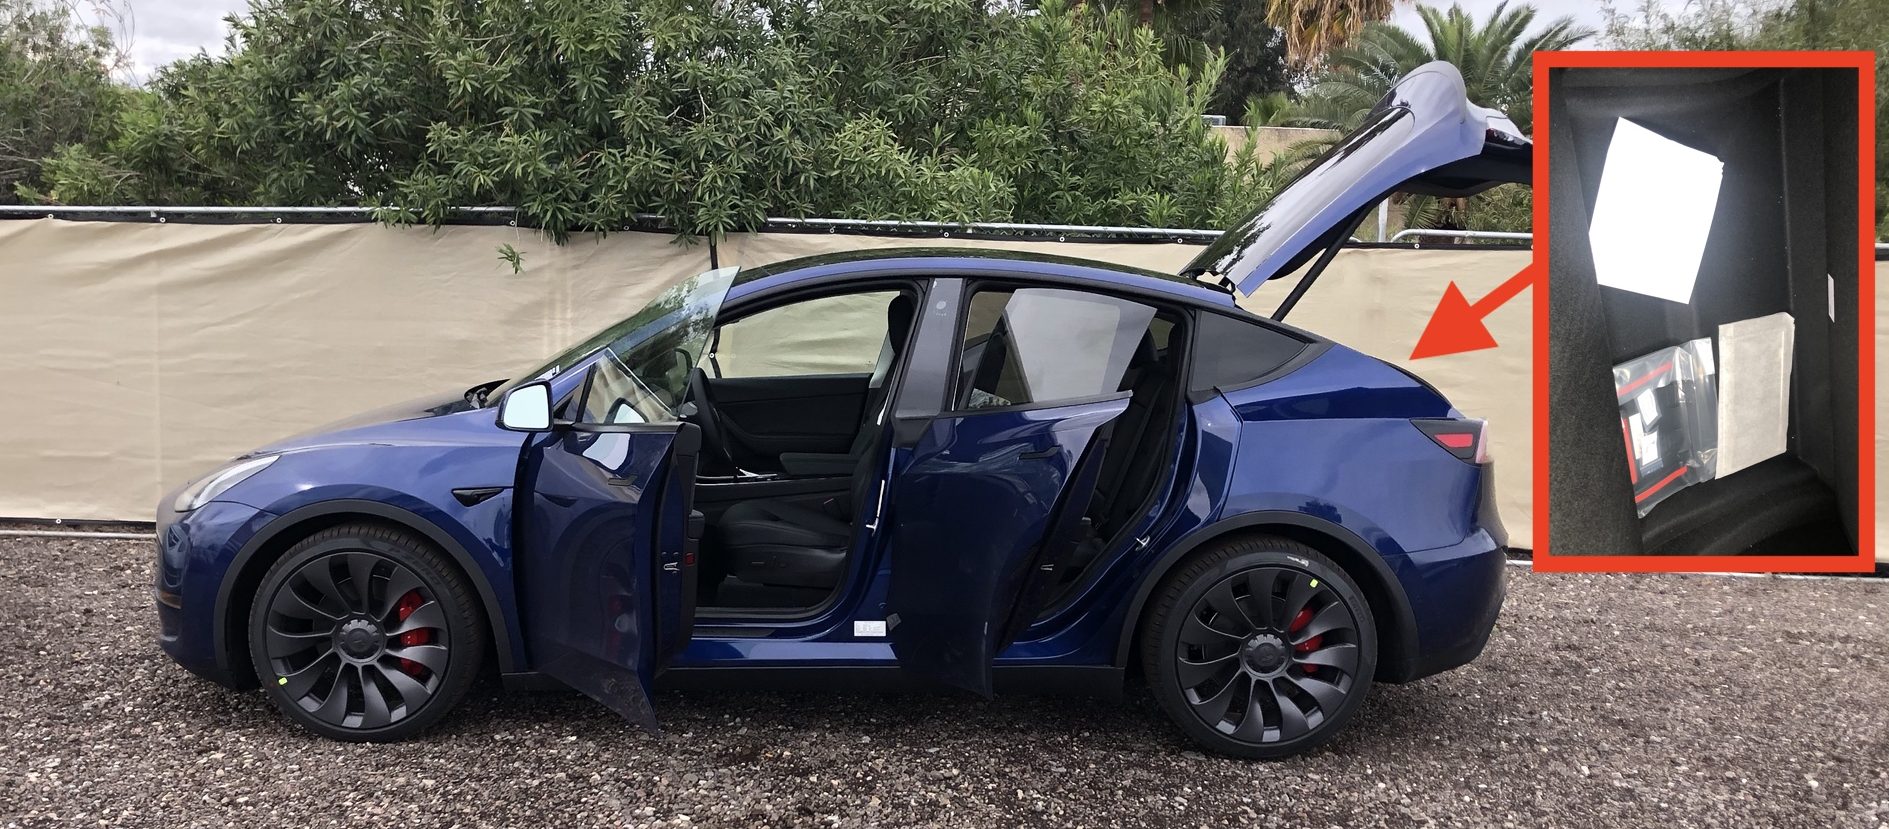 Tesla Model Y New Pictures Reveal Secret Compartment And Great